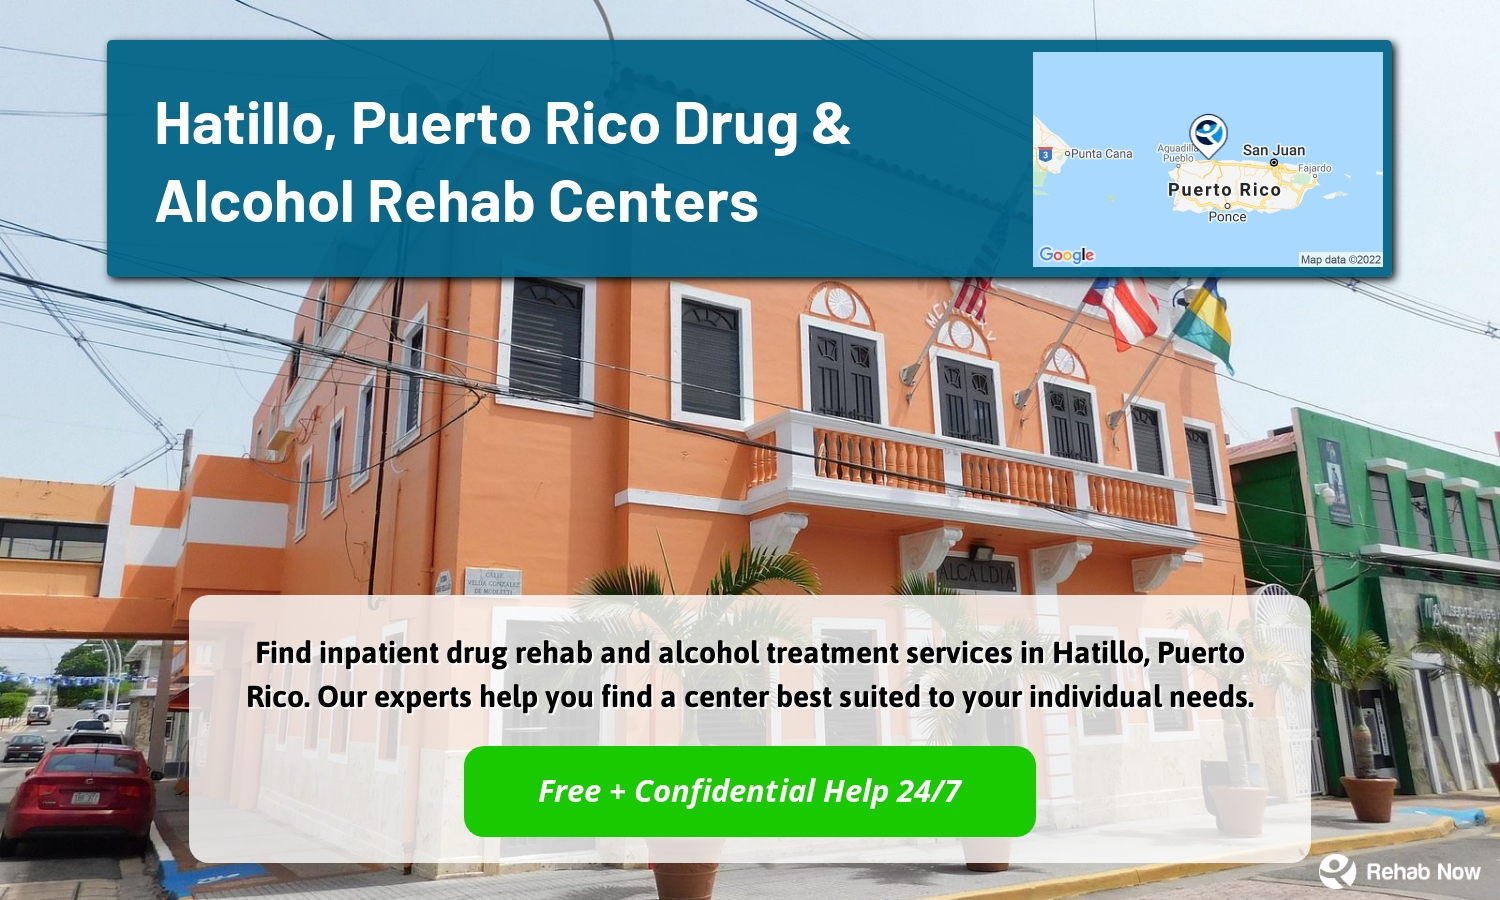 Find inpatient drug rehab and alcohol treatment services in Hatillo, Puerto Rico. Our experts help you find a center best suited to your individual needs.